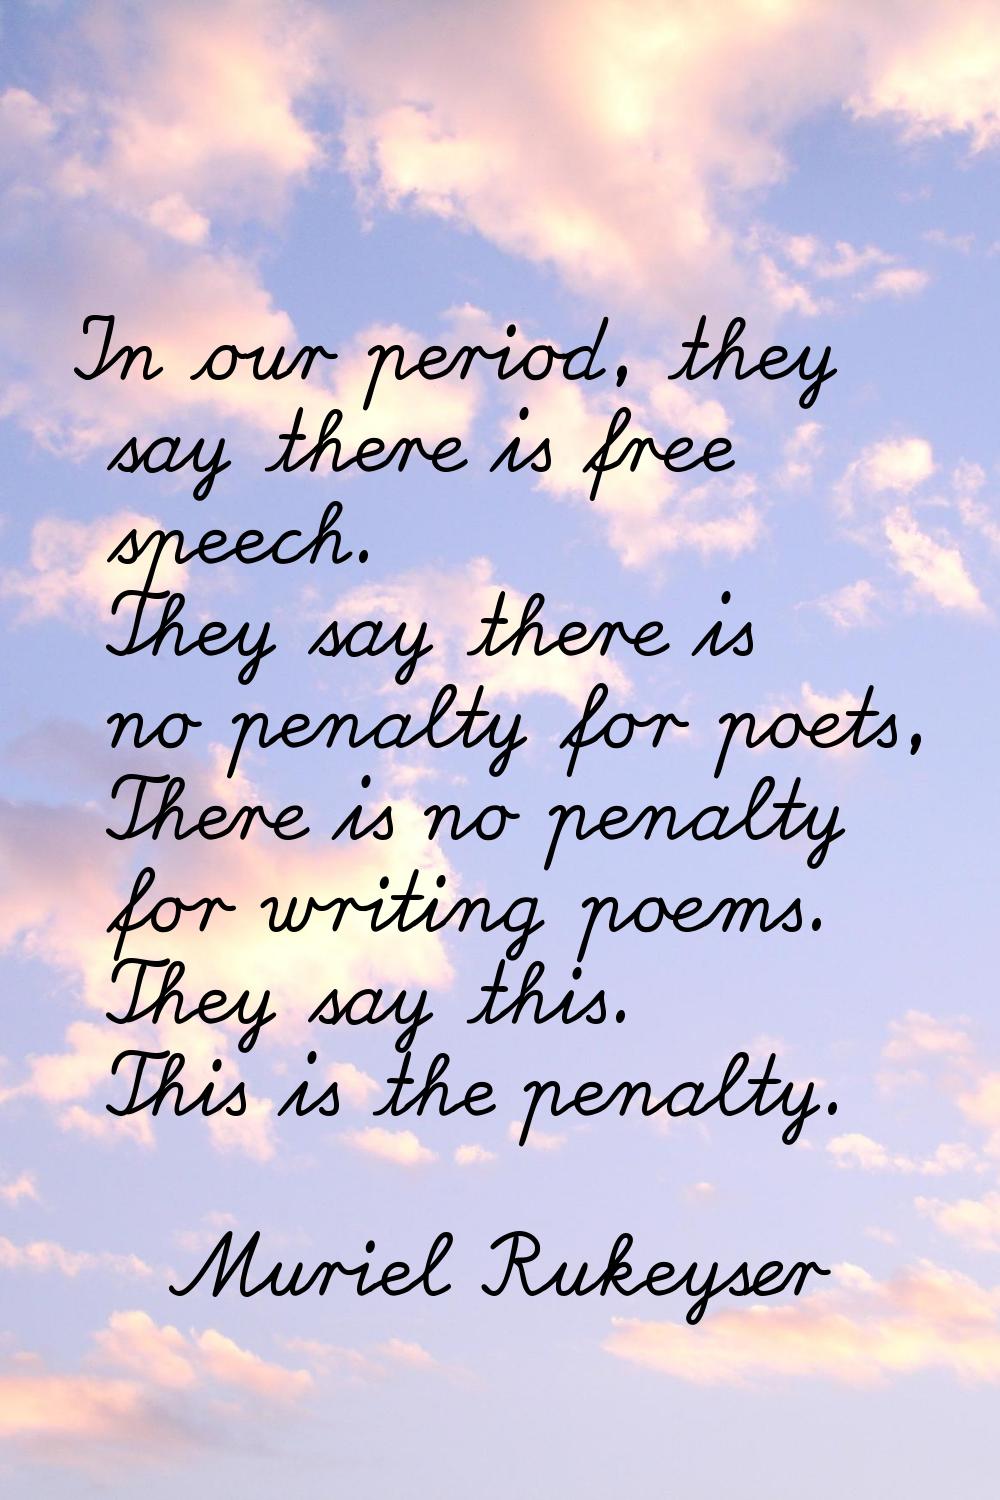 In our period, they say there is free speech. They say there is no penalty for poets, There is no p